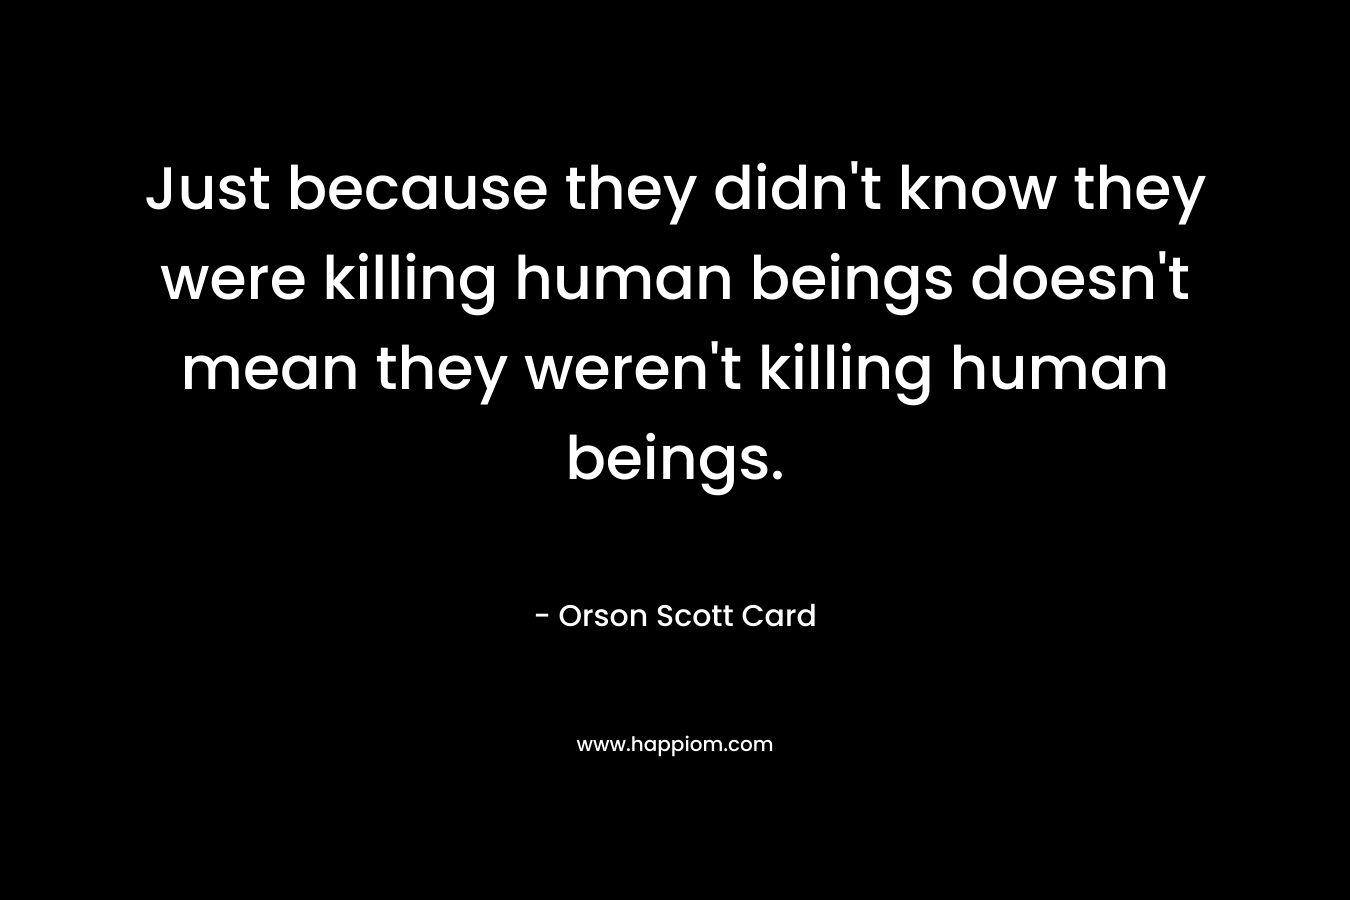 Just because they didn't know they were killing human beings doesn't mean they weren't killing human beings.